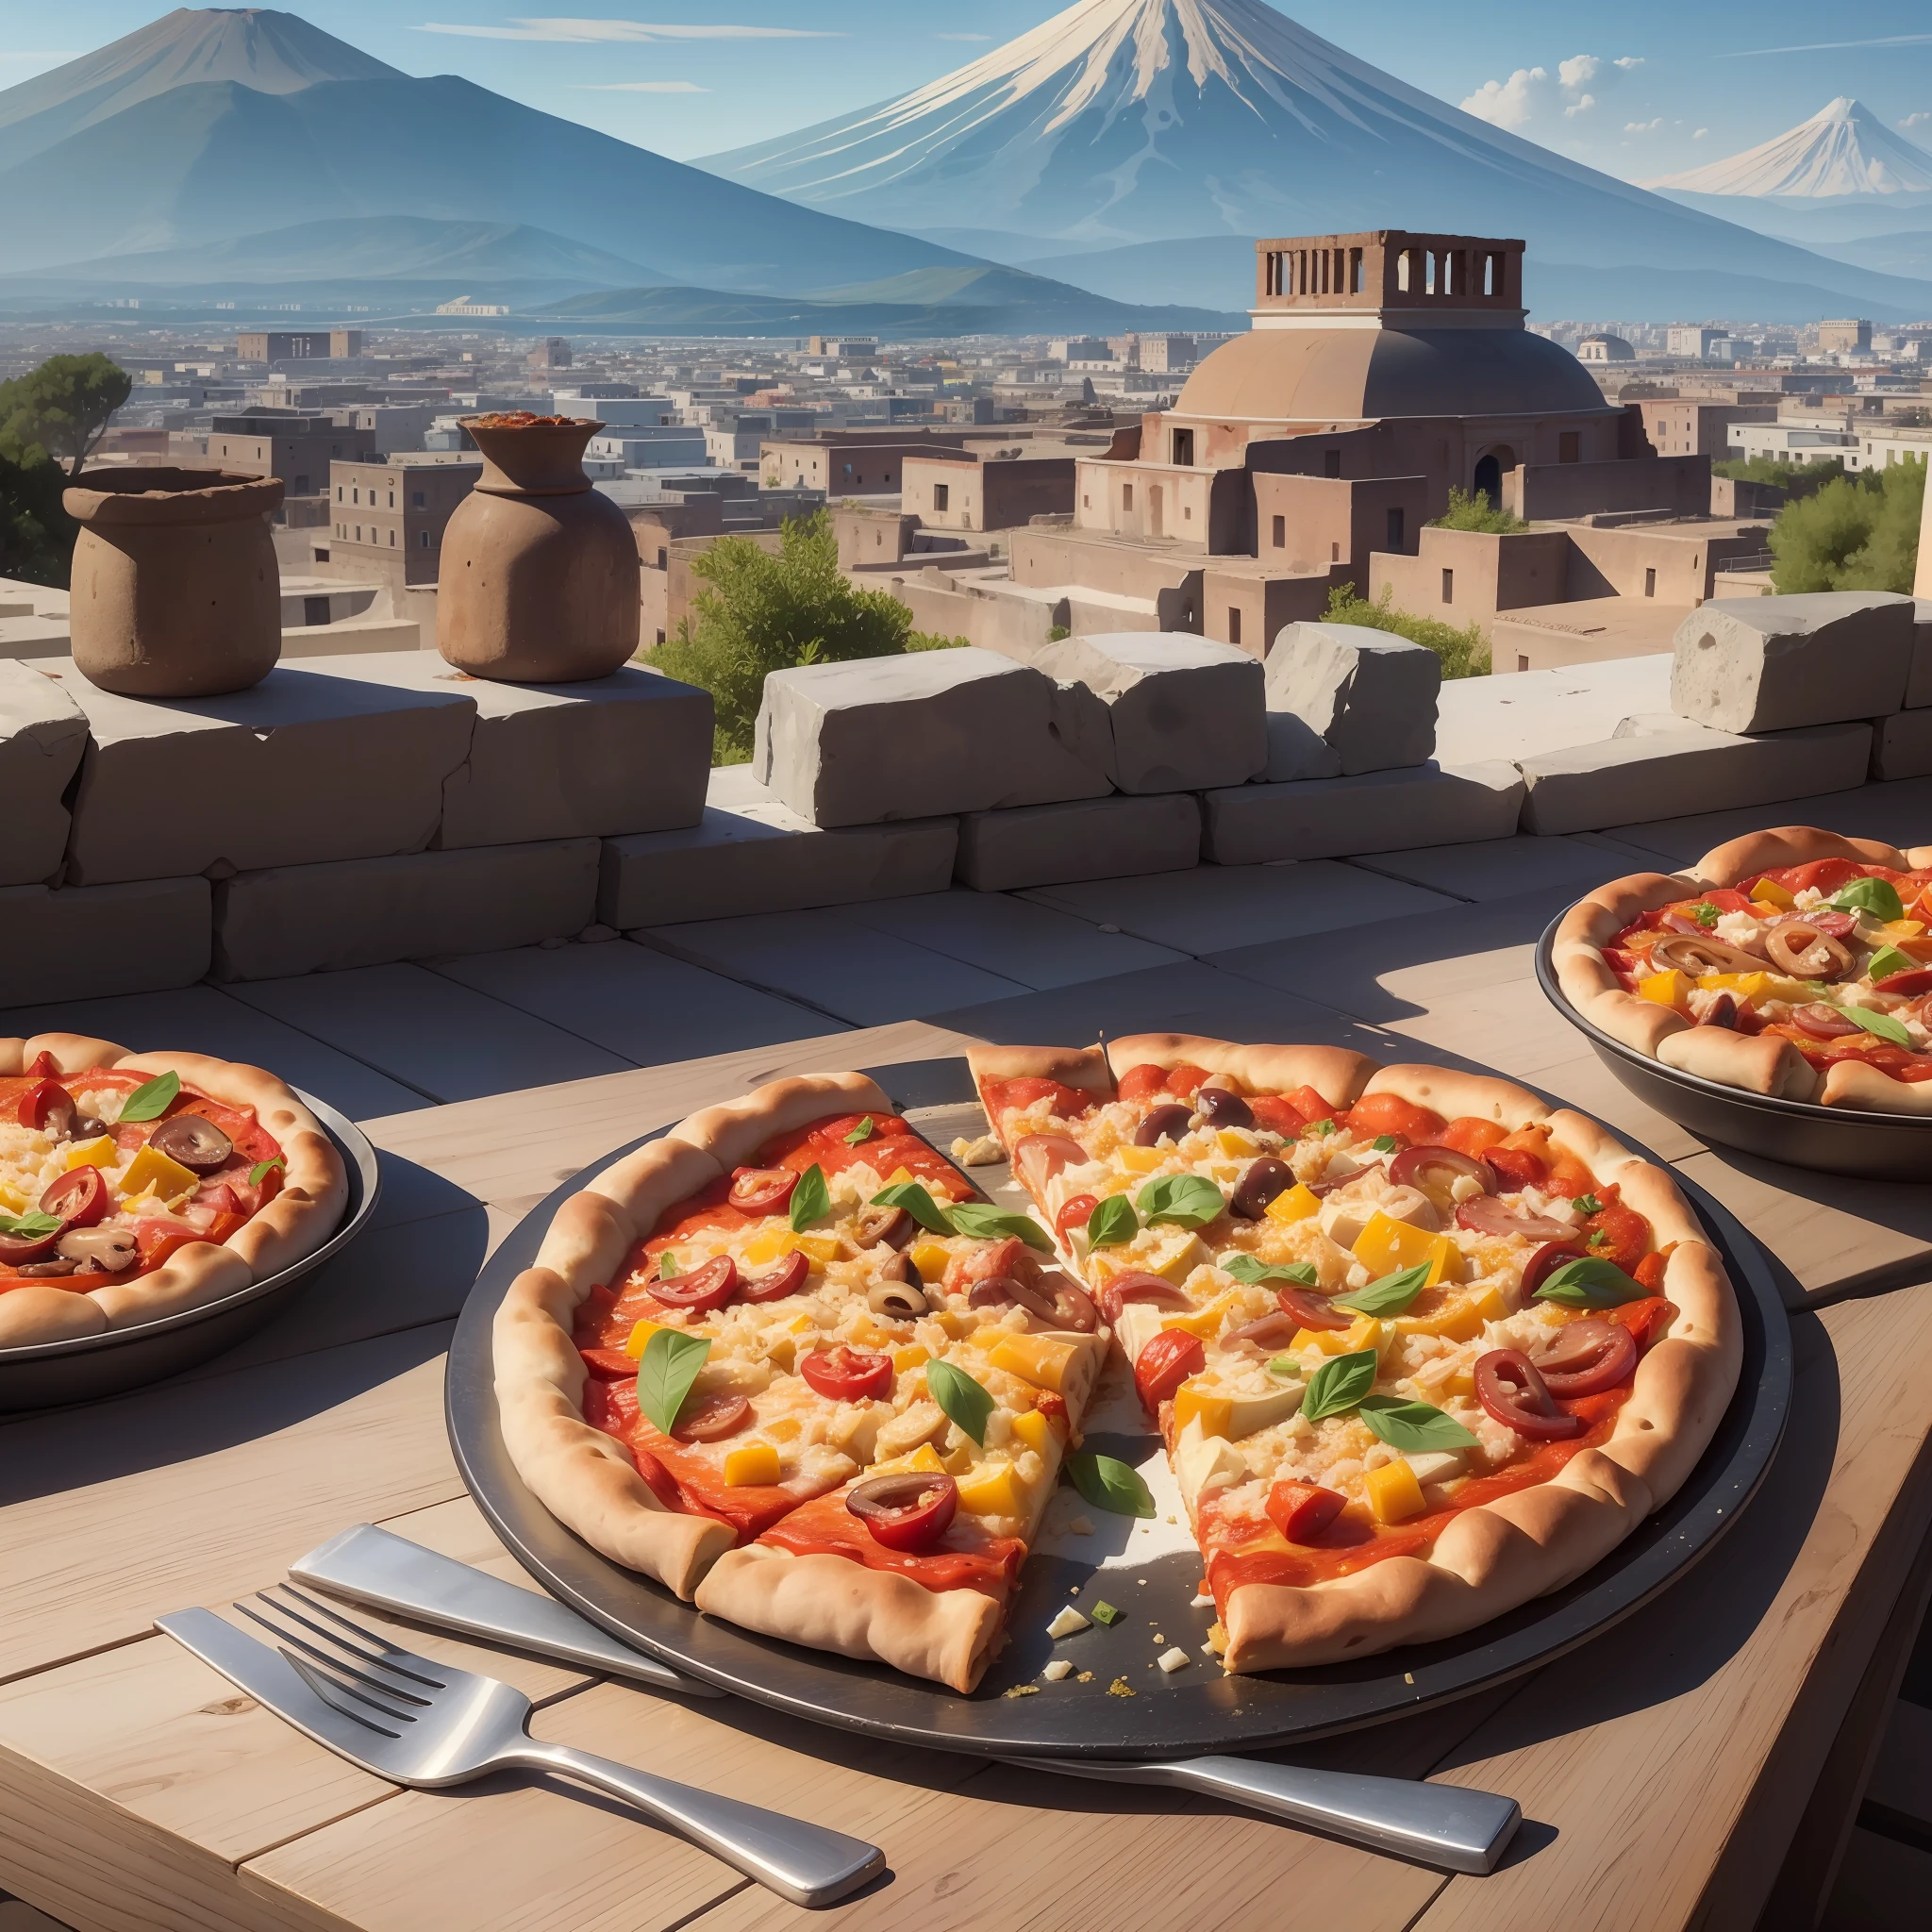 # a grand and colorful pizza, placed against the backdrop of ancient Pompeii. The pizza dough acts as a vibrant canvas for a medley of gourmet toppings. Firstly, we have a golden, bubbling layer of mozzarella cheese. Next, there are red, juicy tomato slices scattered with hints of fresh green basil leaves peeking through. There are generous amounts of caramelized onions, mushrooms, and bell peppers in hues of red, yellow, and green.Continuing the parade of flavors are the savory, thinly sliced pieces of ham, pepperoni, and crispy bacon, followed by a sprinkling of blue cheese crumbles, fresh oregano, and red chili flakes for an extra kick. On the side, there are sliced black olives and marinated artichoke hearts.　The entire spectacle sits on a perfectly baked crust, slightly charred on the edges. The warm, inviting glow from the wood-fired oven illuminates the scene. In the background, the ruins of Pompeii stand silent, Mt. Vesuvius looms large, with a sky gently lit by the setting sun.